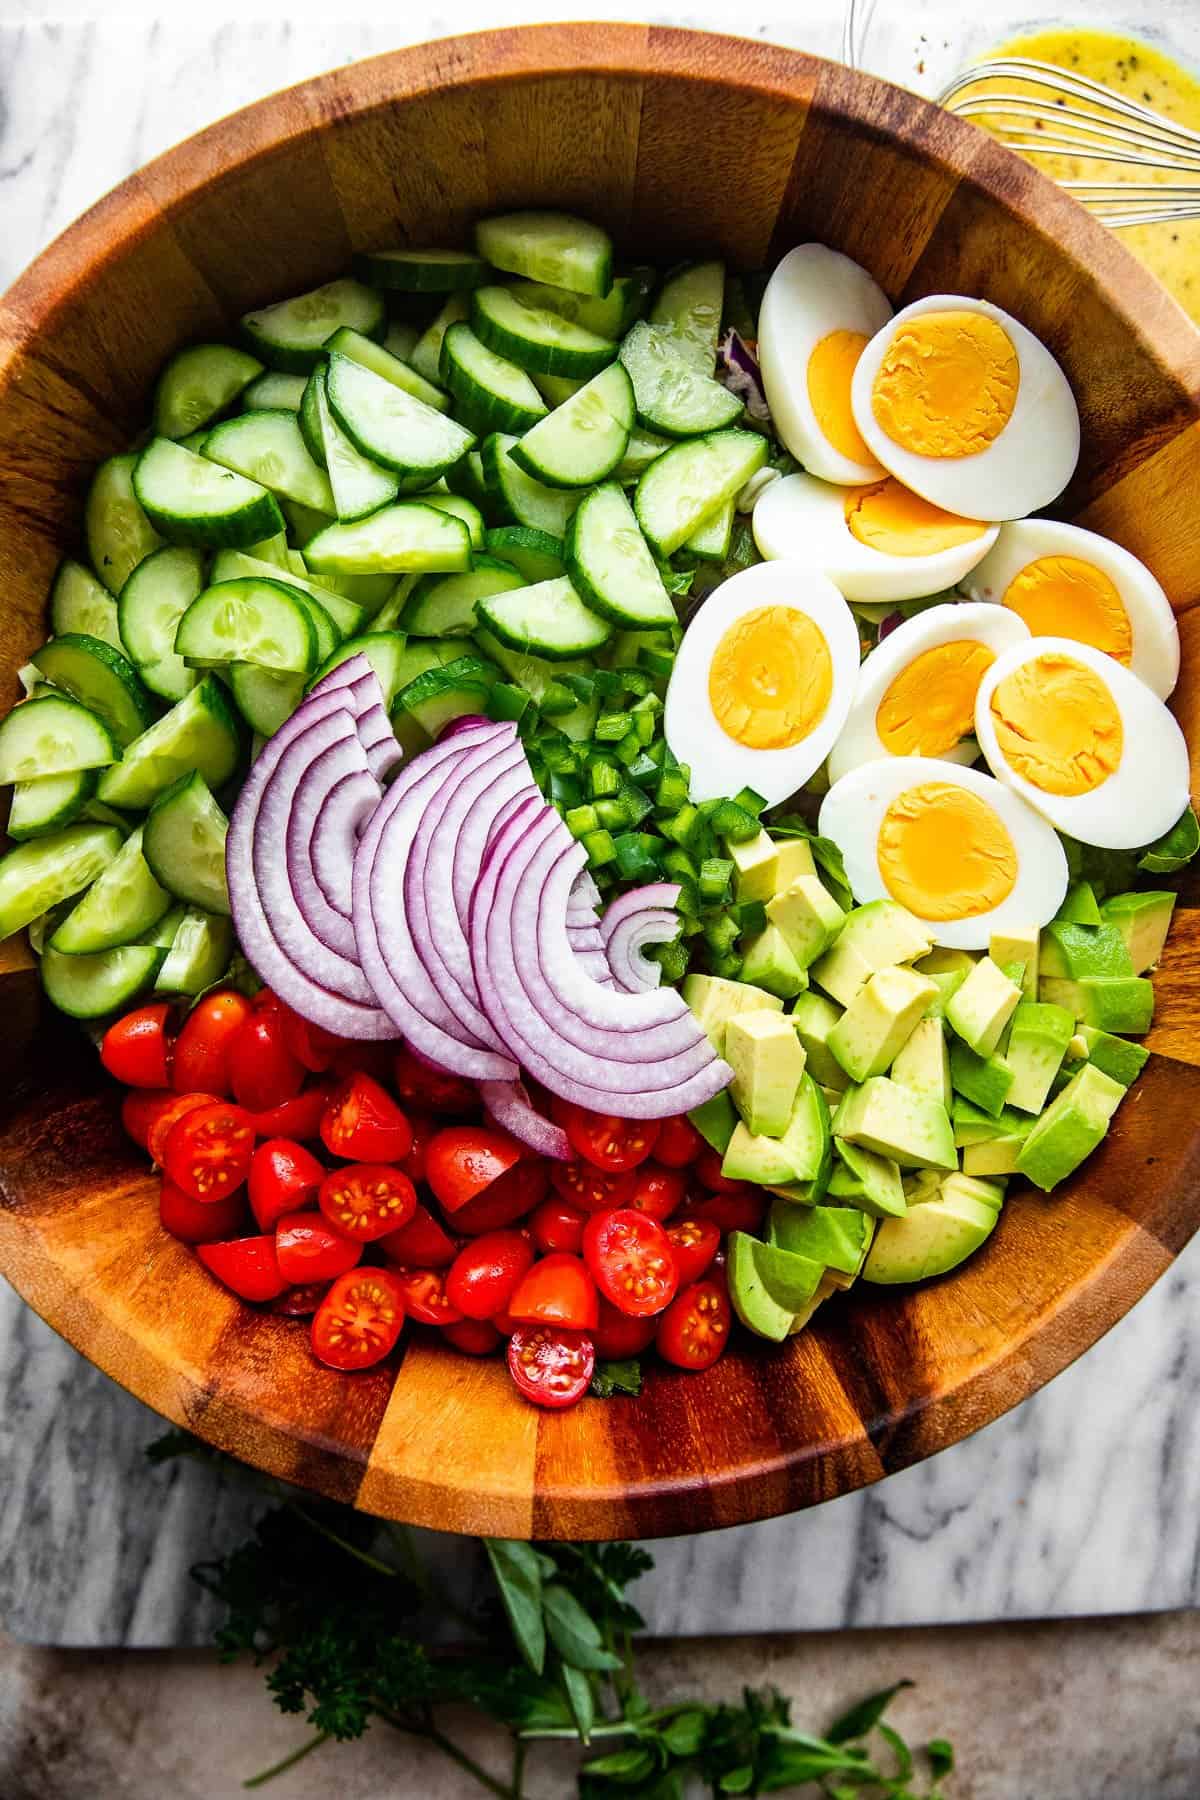 Eggs, Cucumbers, Avocado, and Tomatoes in a wooden salad bowl